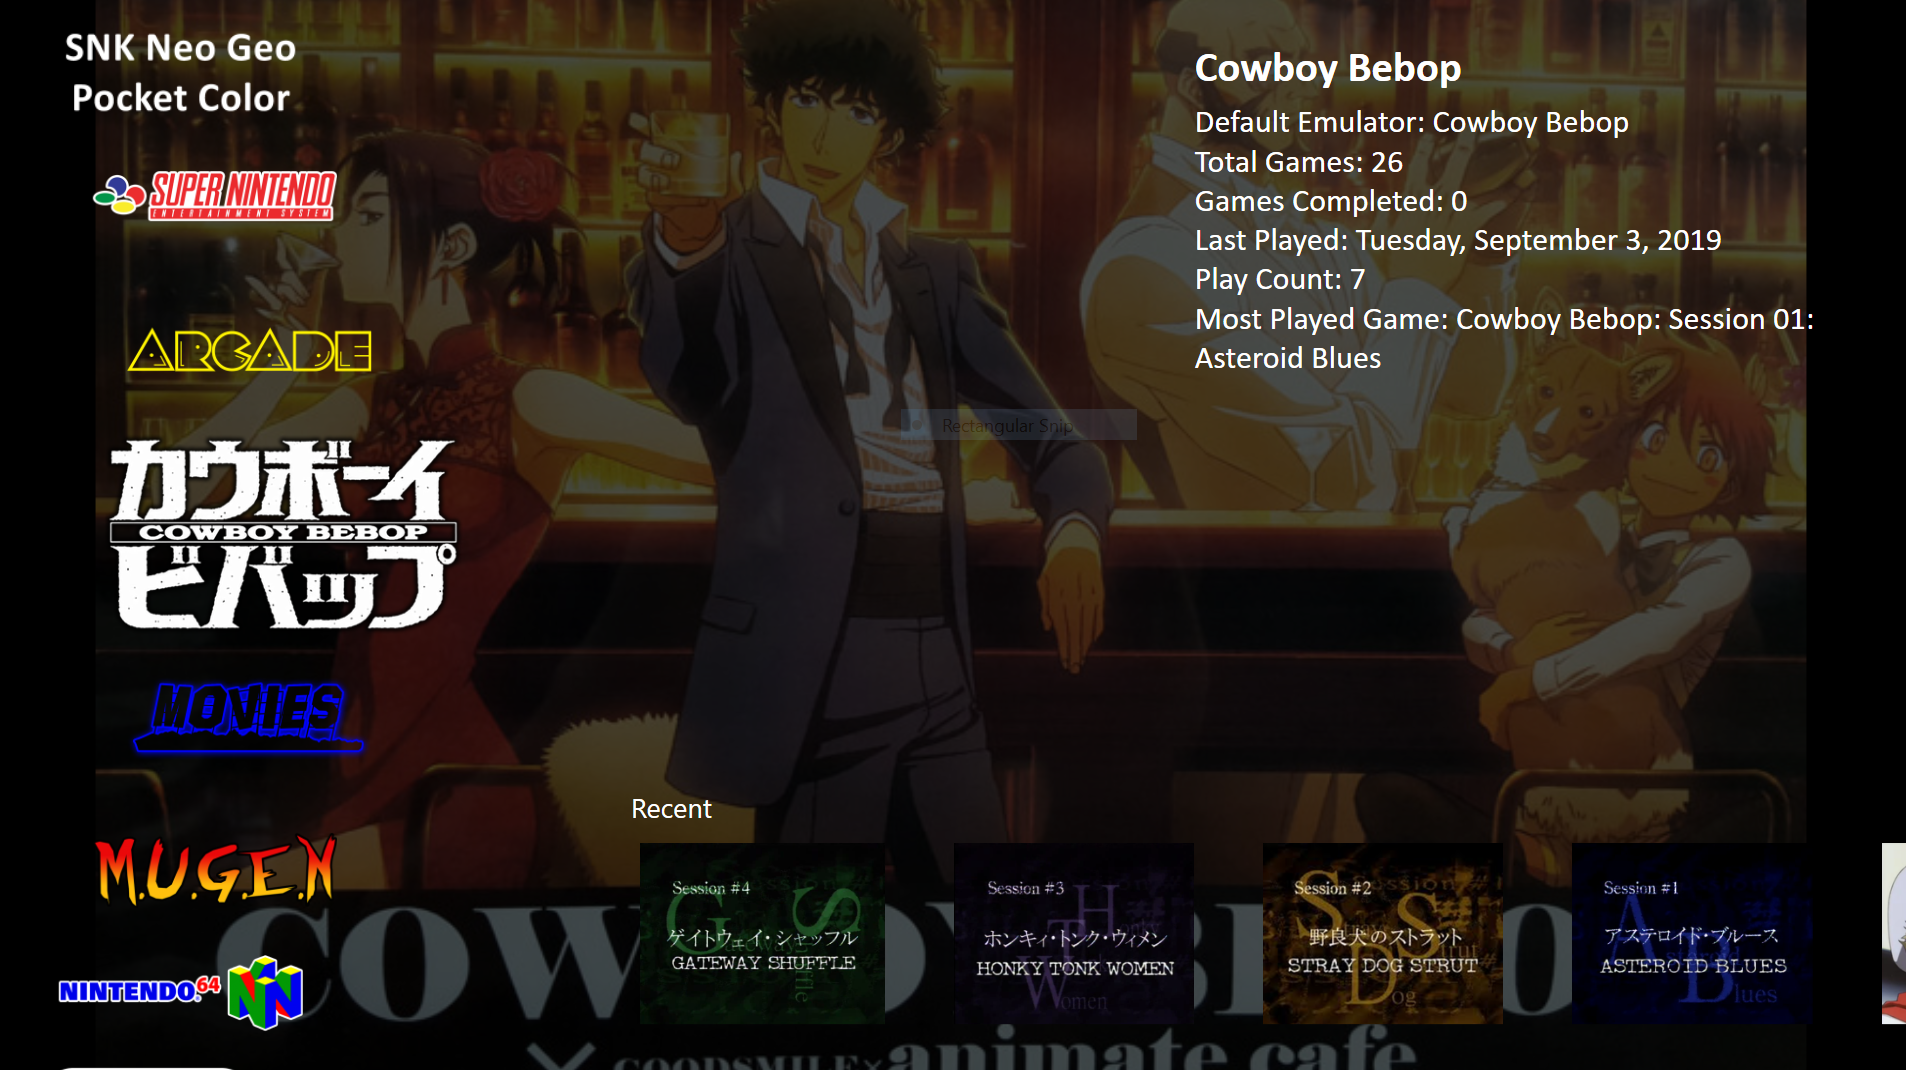 More information about "Cowboy Bebop: Setup for the episodes/Sessions to run in Bigbox"